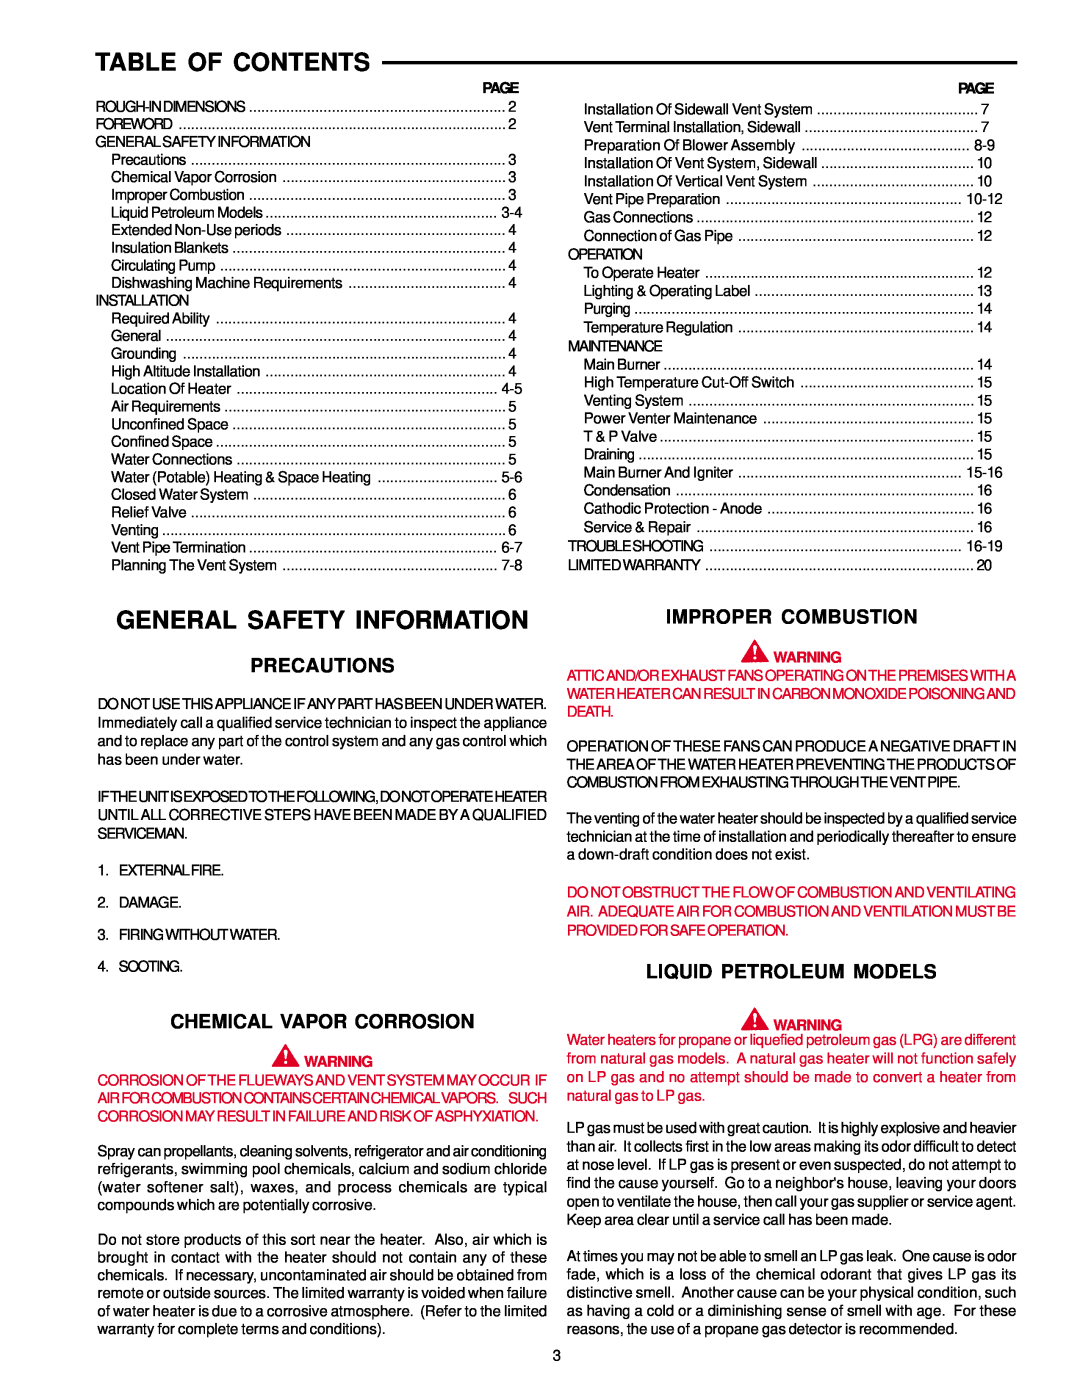 A.O. Smith BTF-75 warranty Table Of Contents, General Safety Information, Precautions, Chemical Vapor Corrosion 